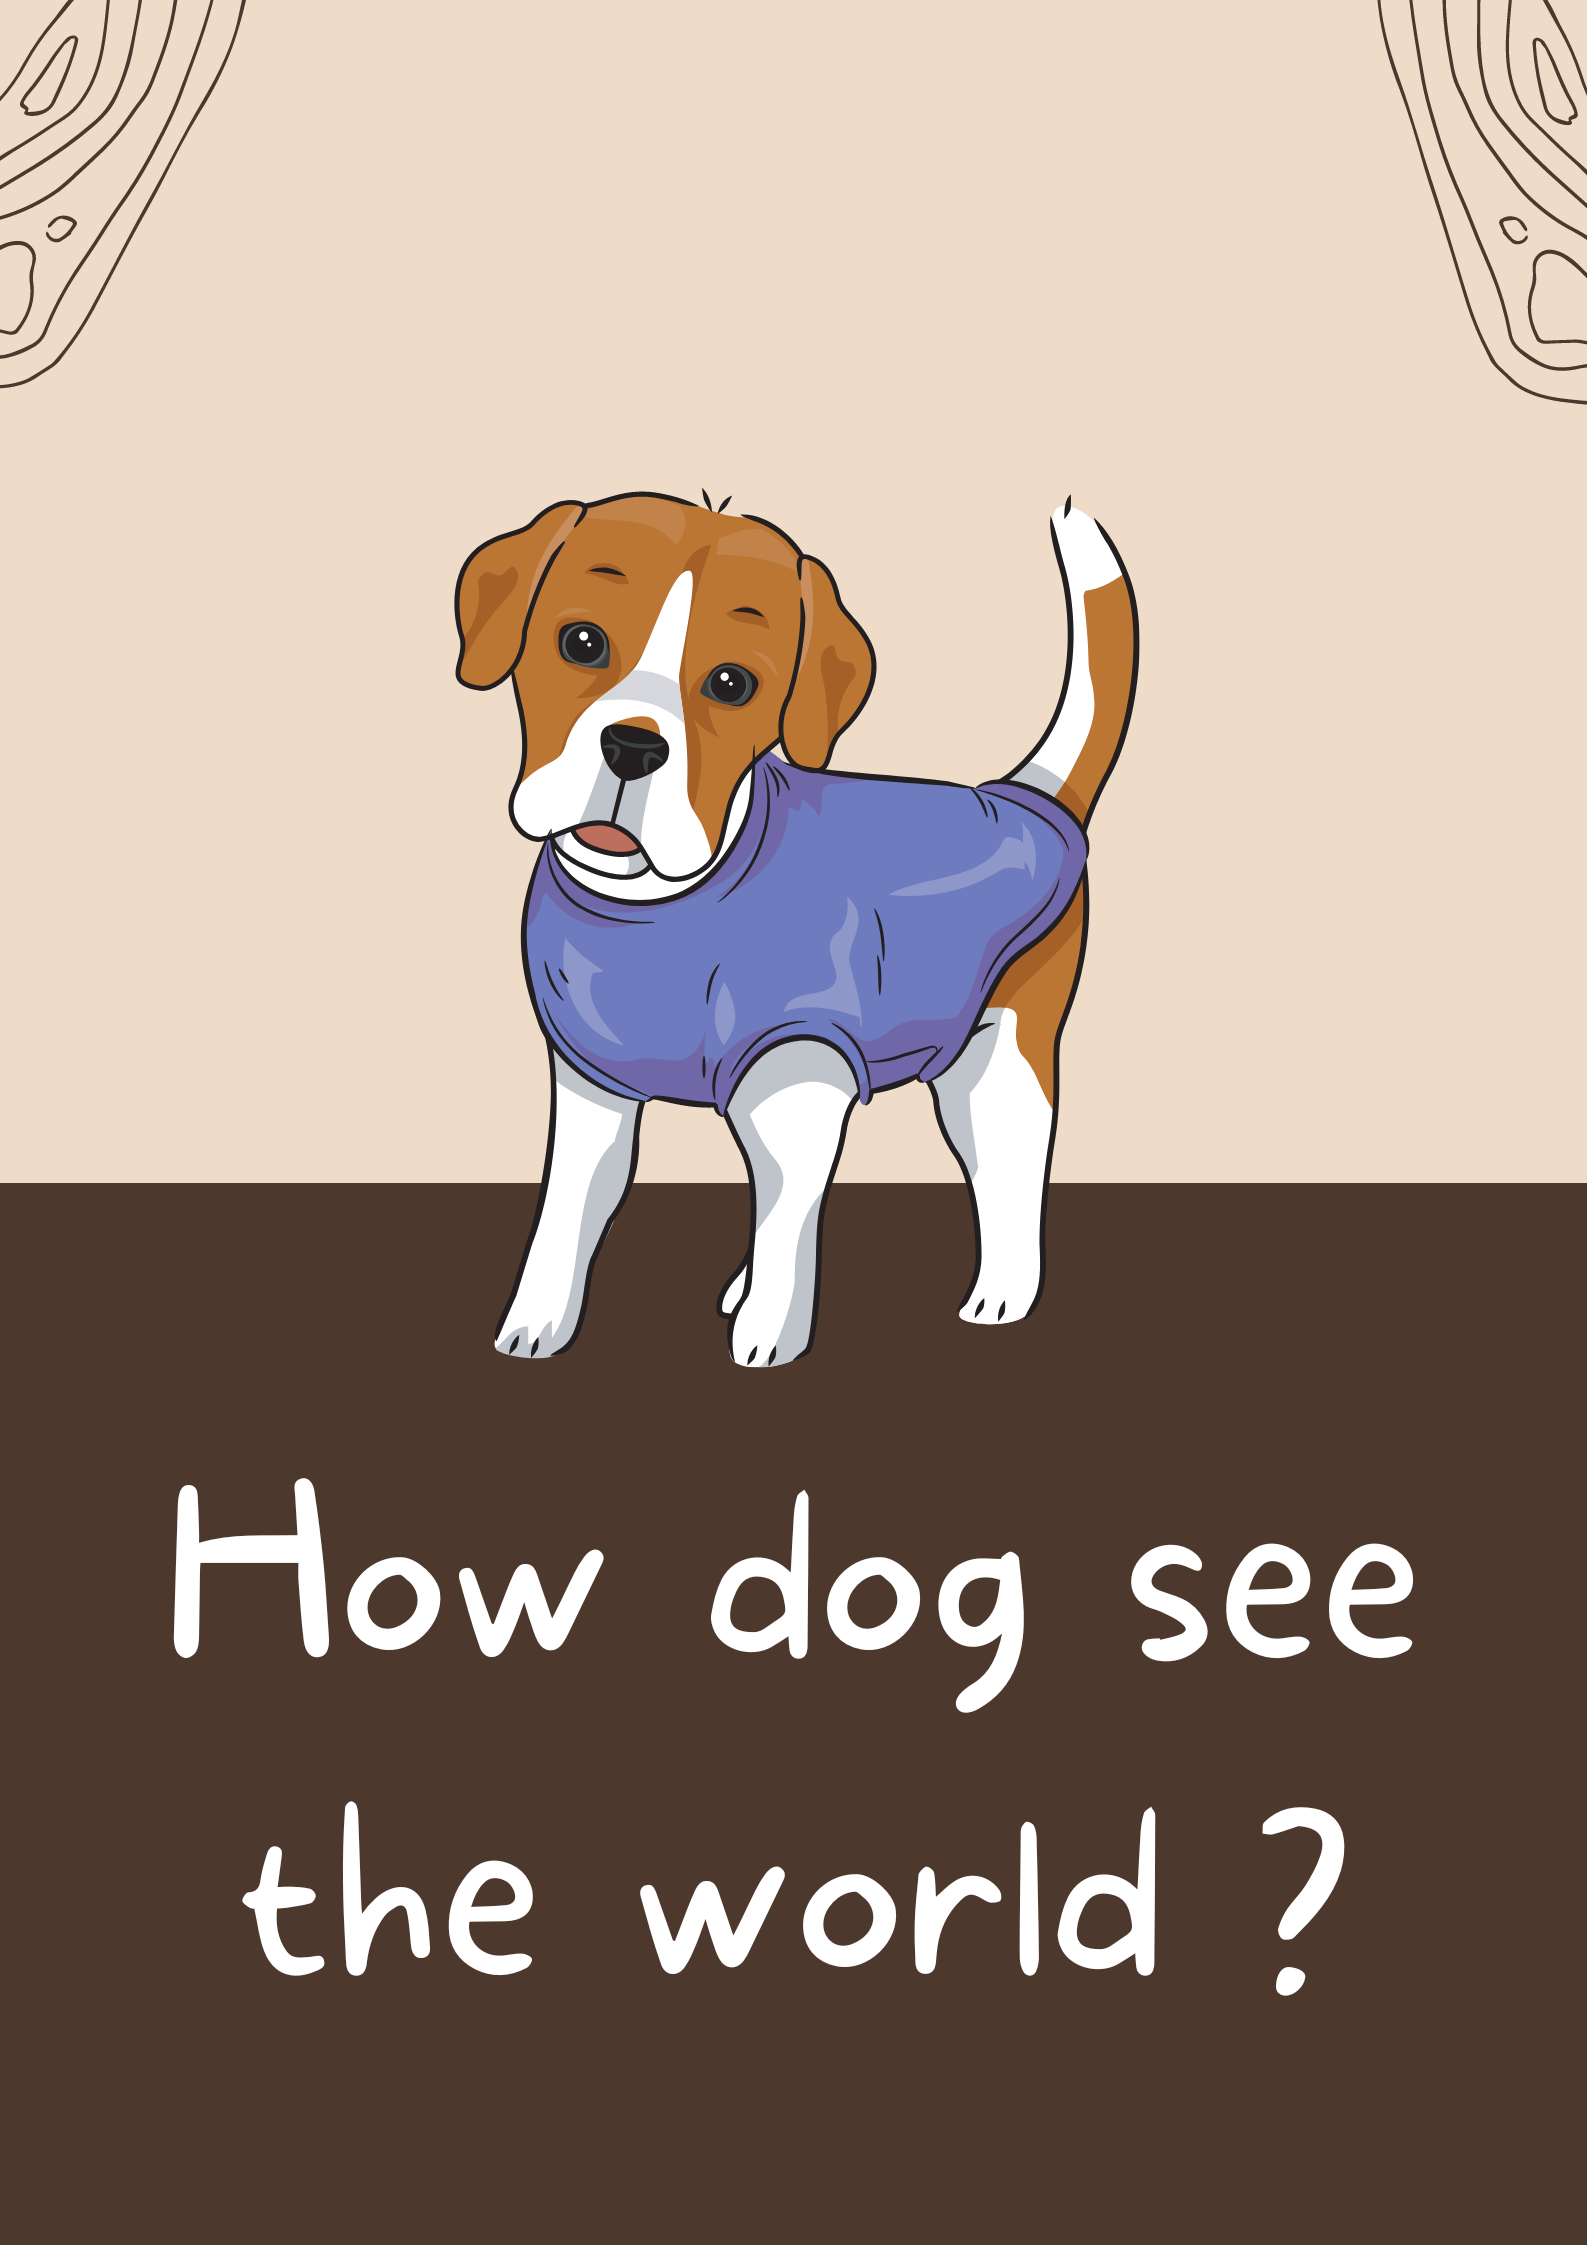 How dog see the world